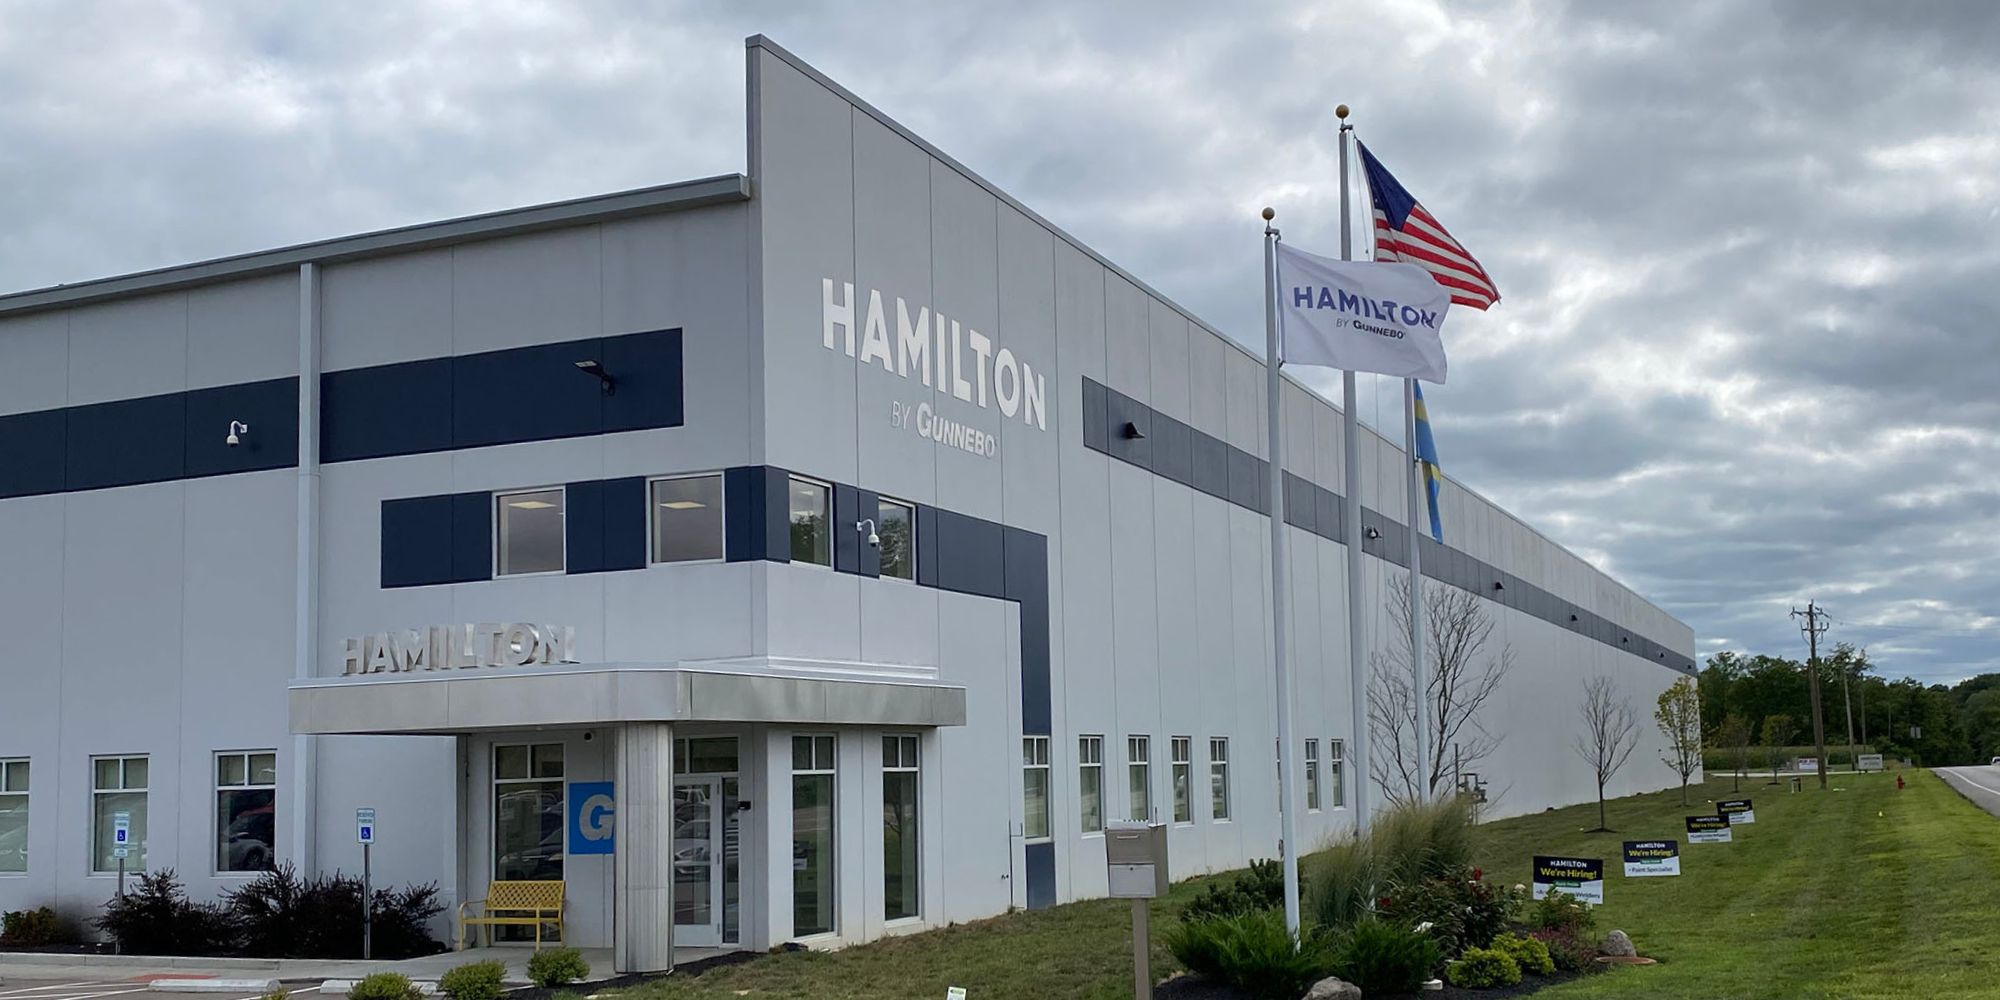 Ciminelli Real Estate Corporation named Hamilton by Gunnebo authorized channel partner